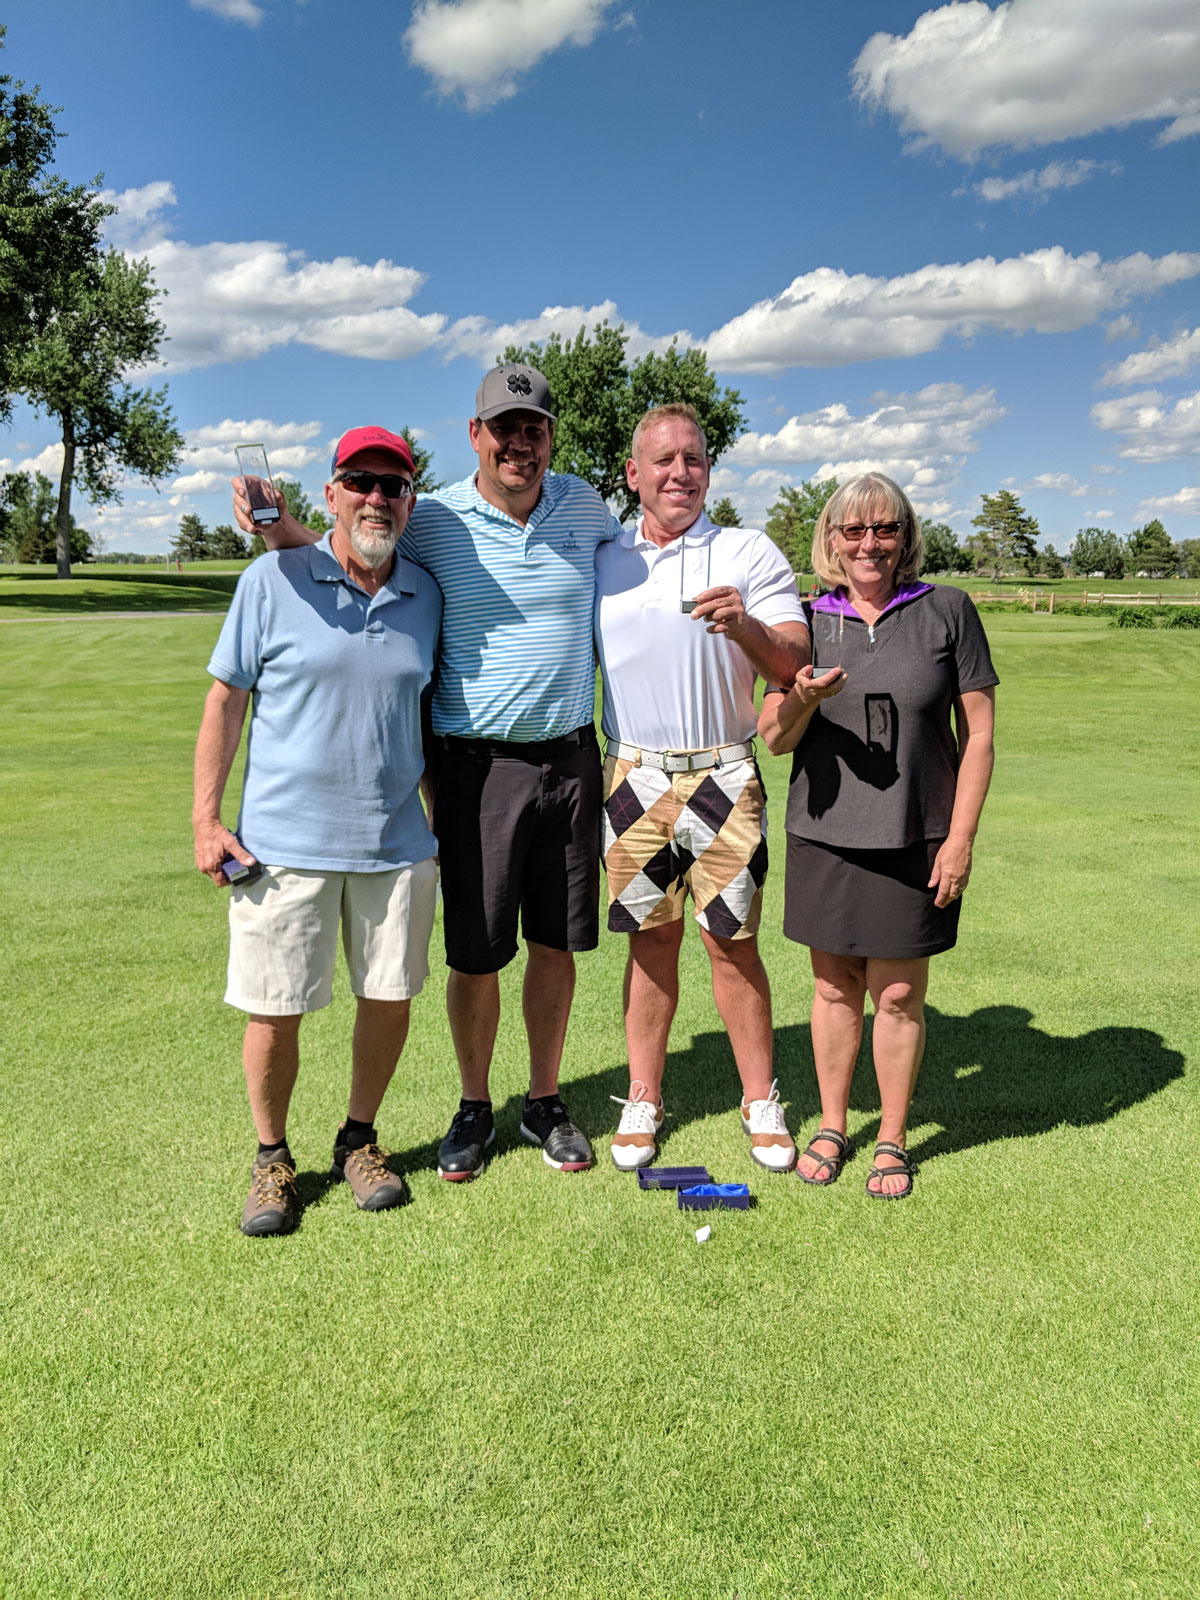 (left to right) 1st place team - Gary Childs, Brian Childs, David Sheller, and Julie Haught 